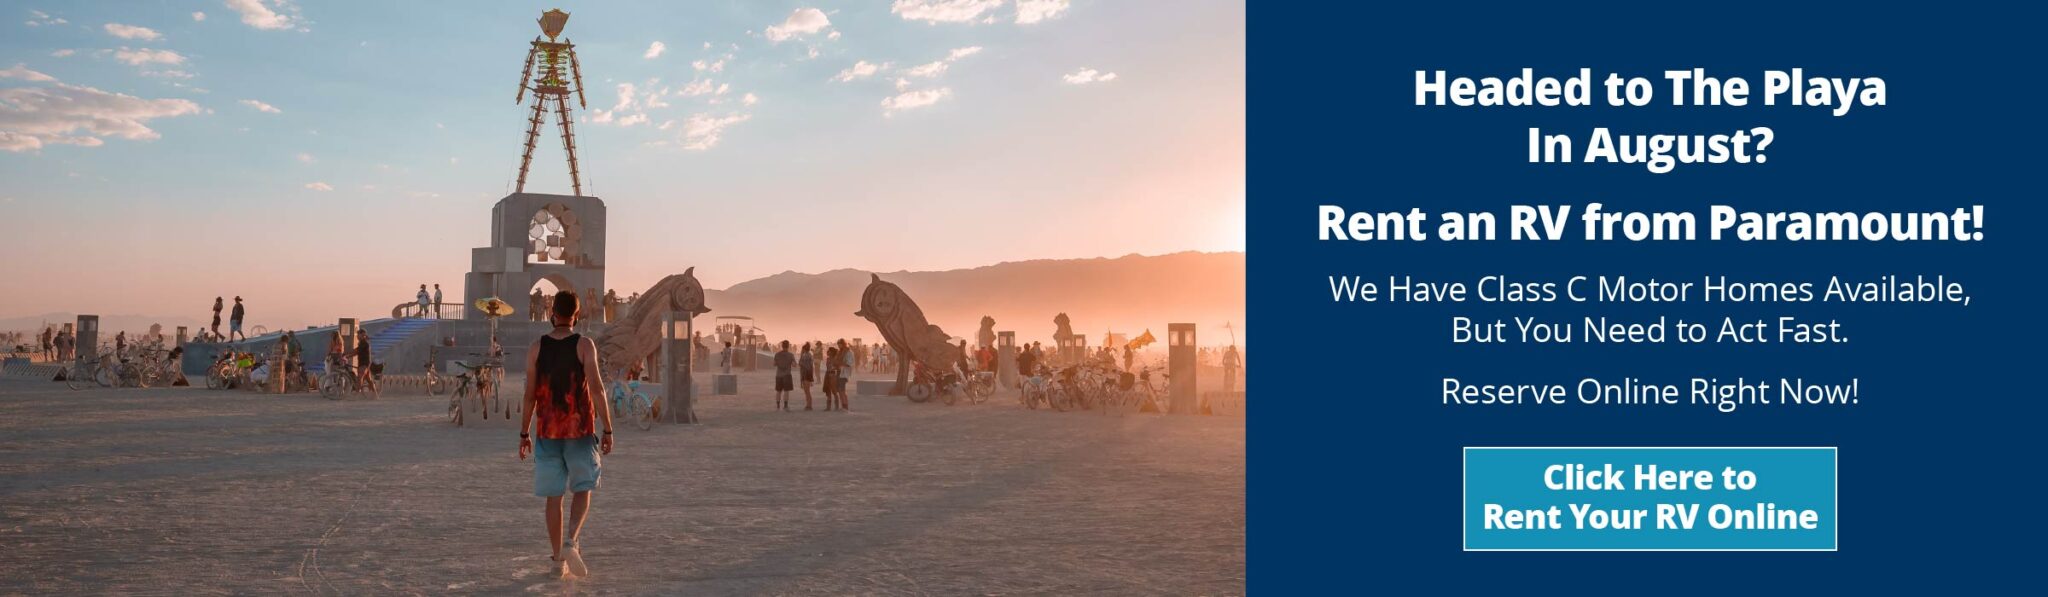 Headed to The Playa In August? Rent an RV from Paramount! We Have Two Remianing Class C Motor Homes Available, But You Need to Act Fast. Reserve Online Right Now!